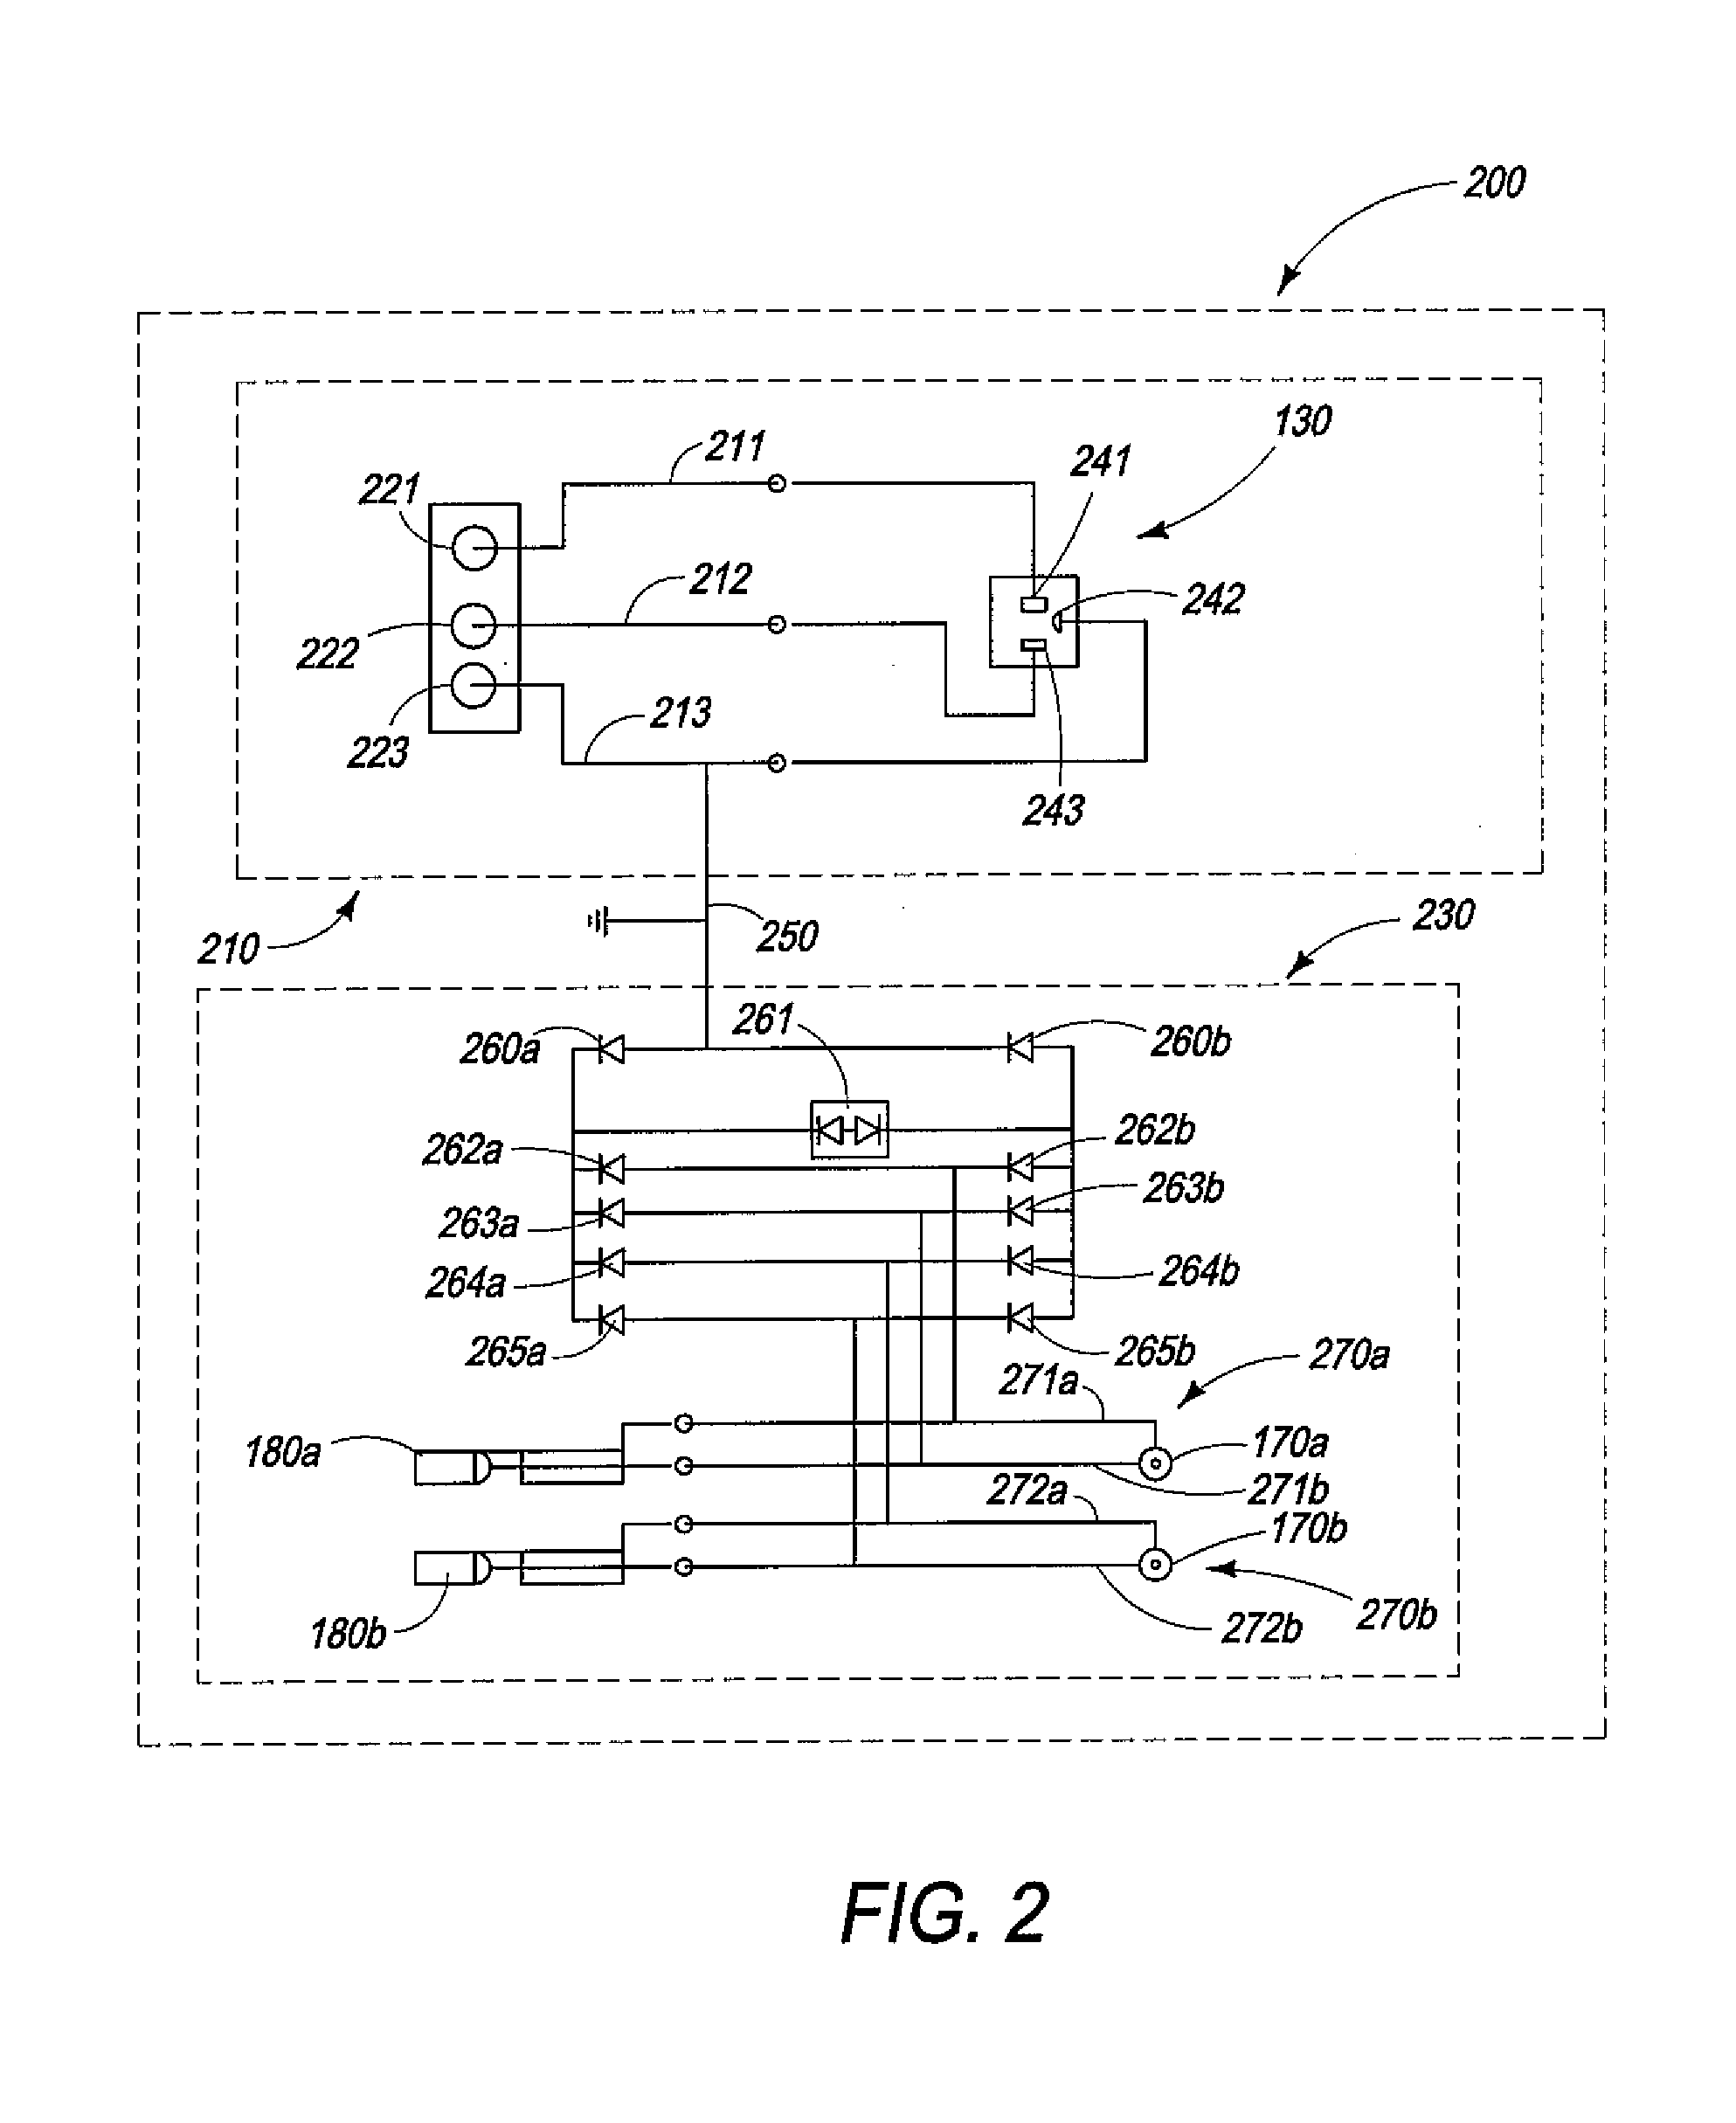 Protection circuit for signal and power